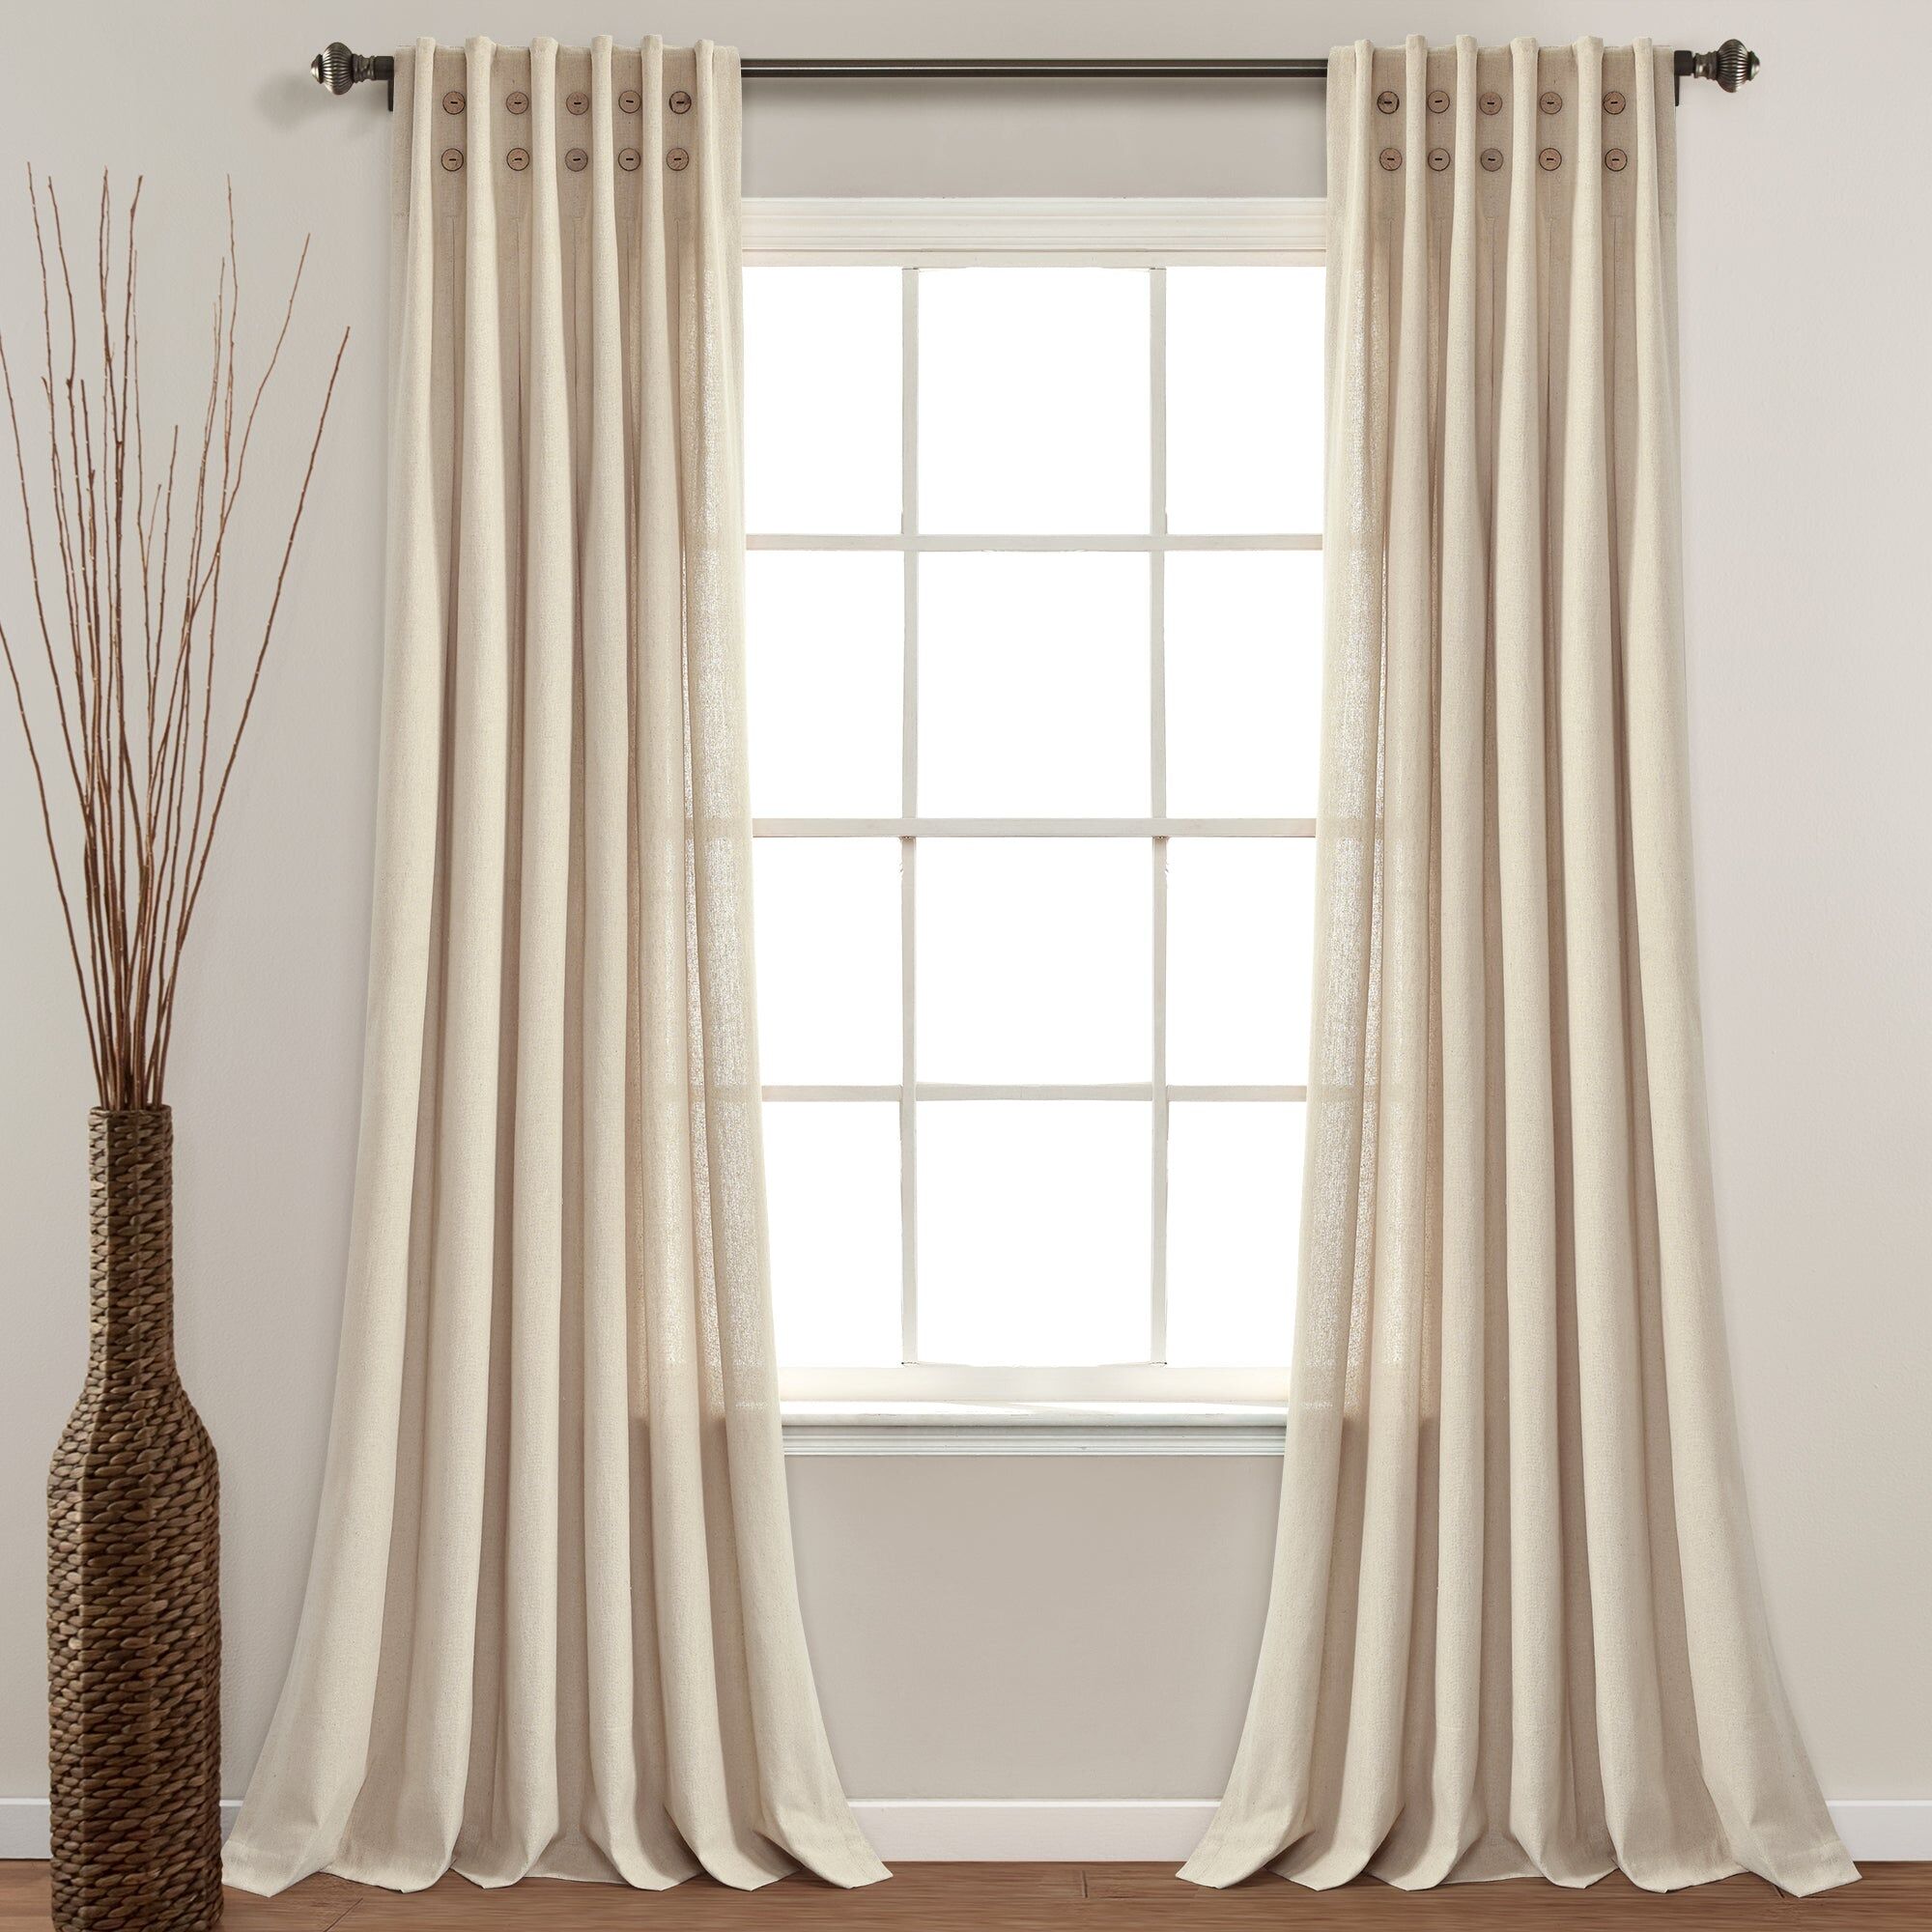 Lush Decor Linen Button Pinched Pleat Window Curtain Panel